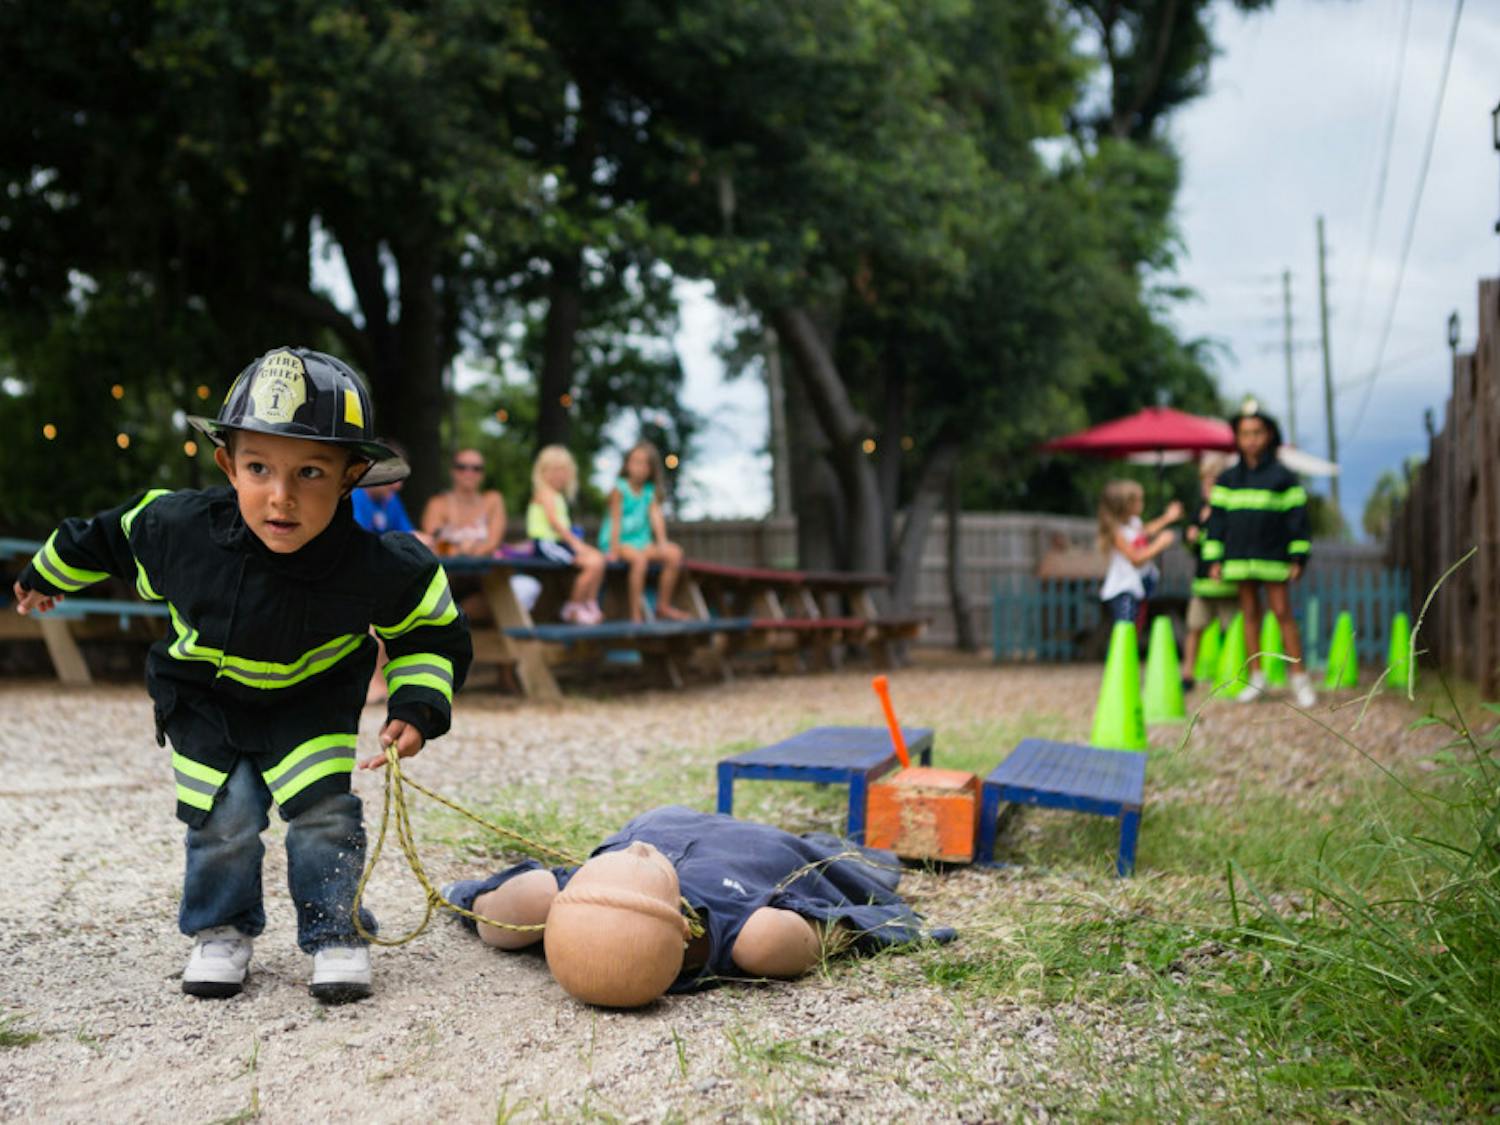 Children participated in a “Kiddie Combat” obstacle challenge during the “Sausages for Safety” fundraiser. Read the story here.&nbsp;